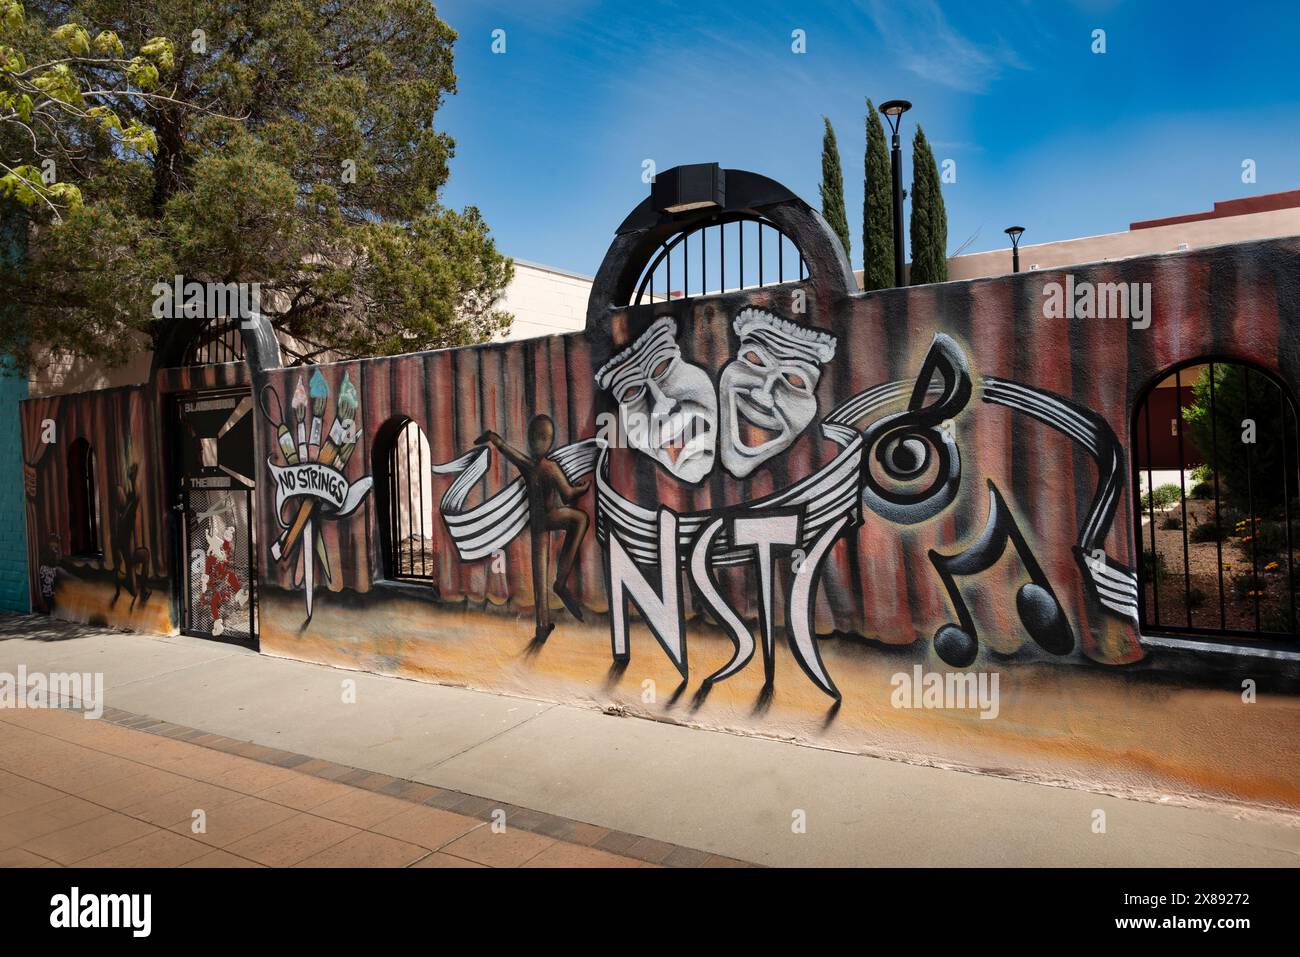 The whimsical, artistic mural on walled gate, at No Strings Theater Company entrance to the black box theater in downtown Las Cruces, NM, USA Stock Photo